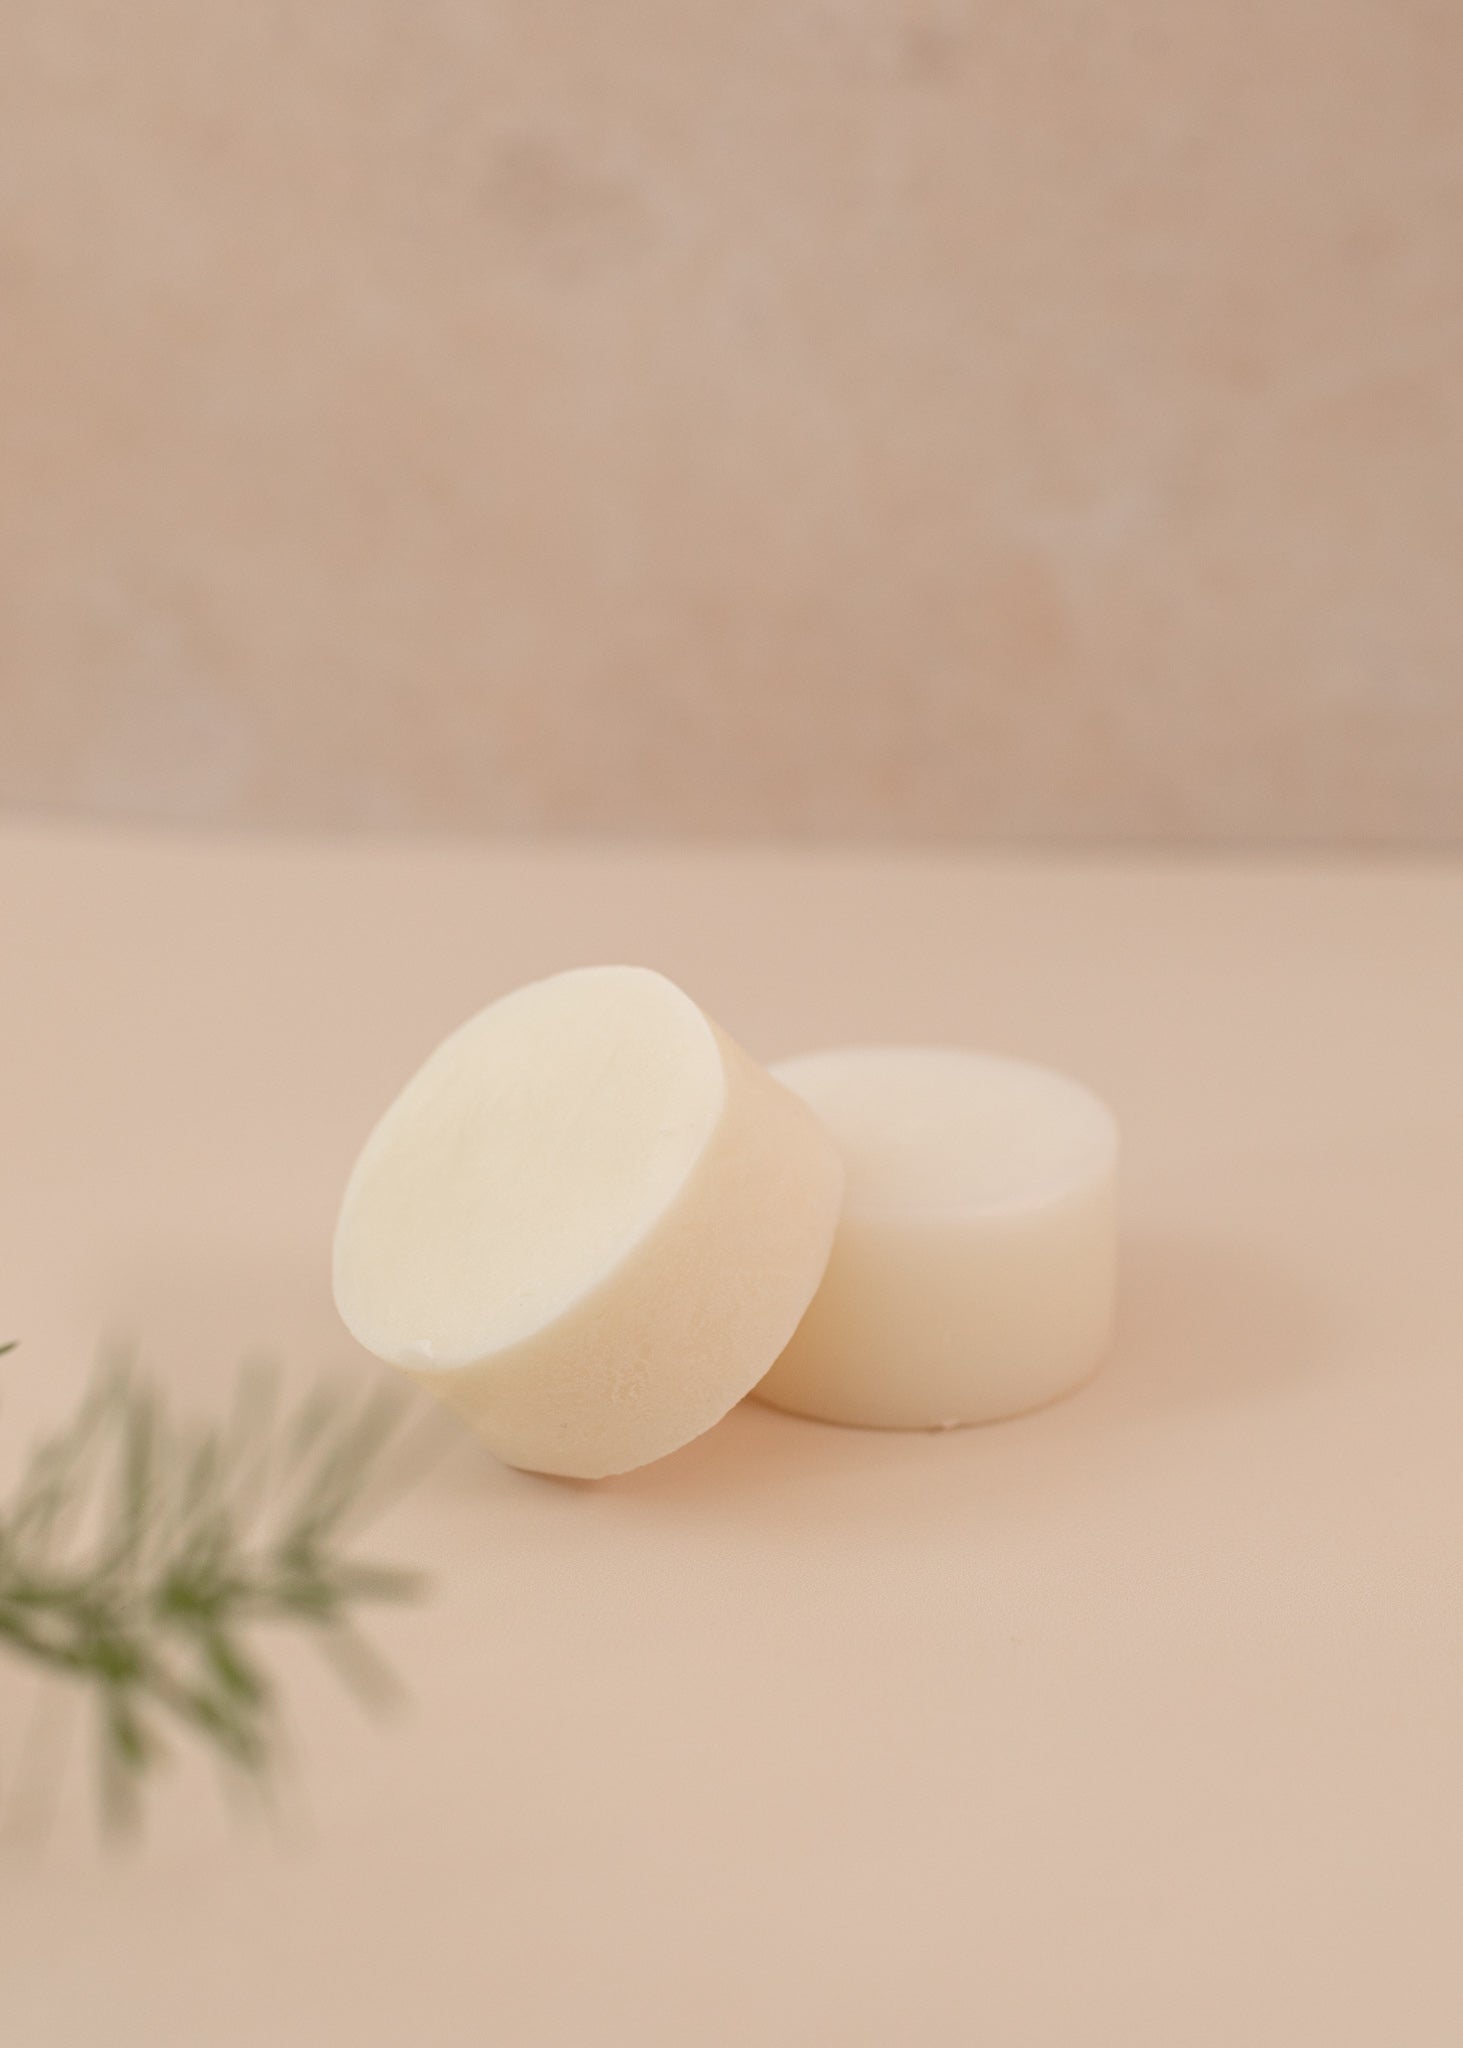 Photo of a shampoo and conditioner bar on a light pink backdrop